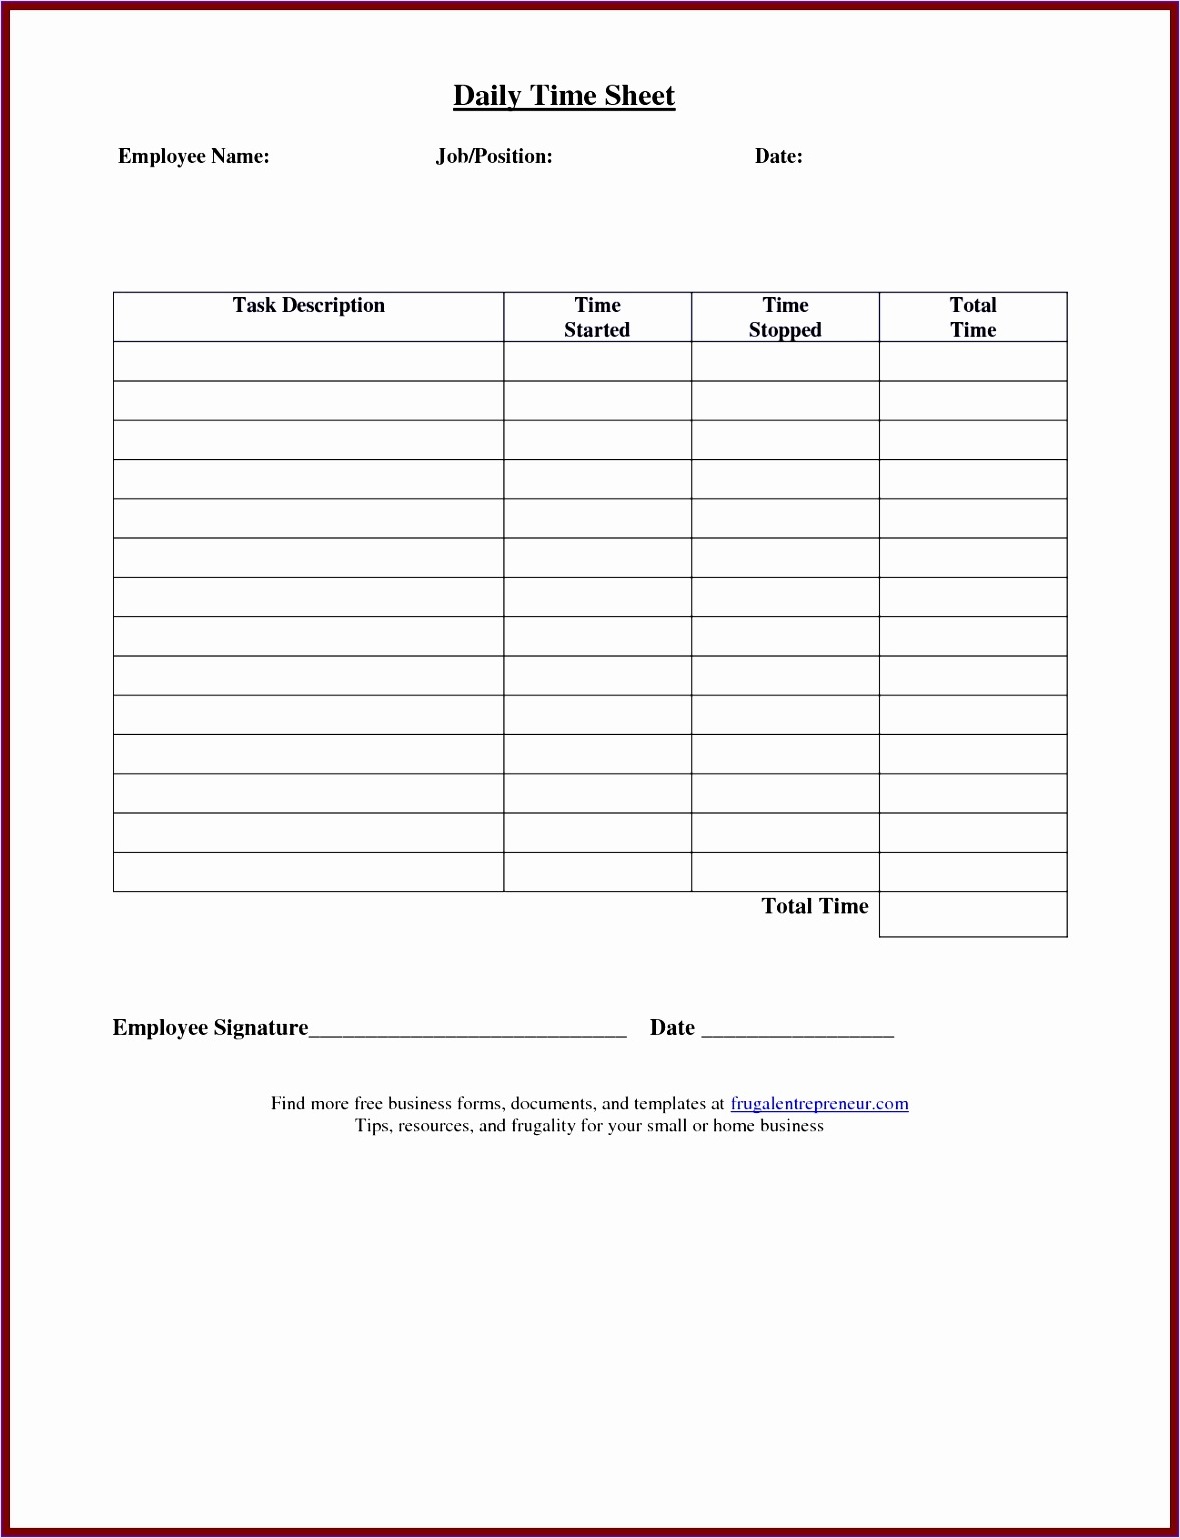 daily employee timesheet template example